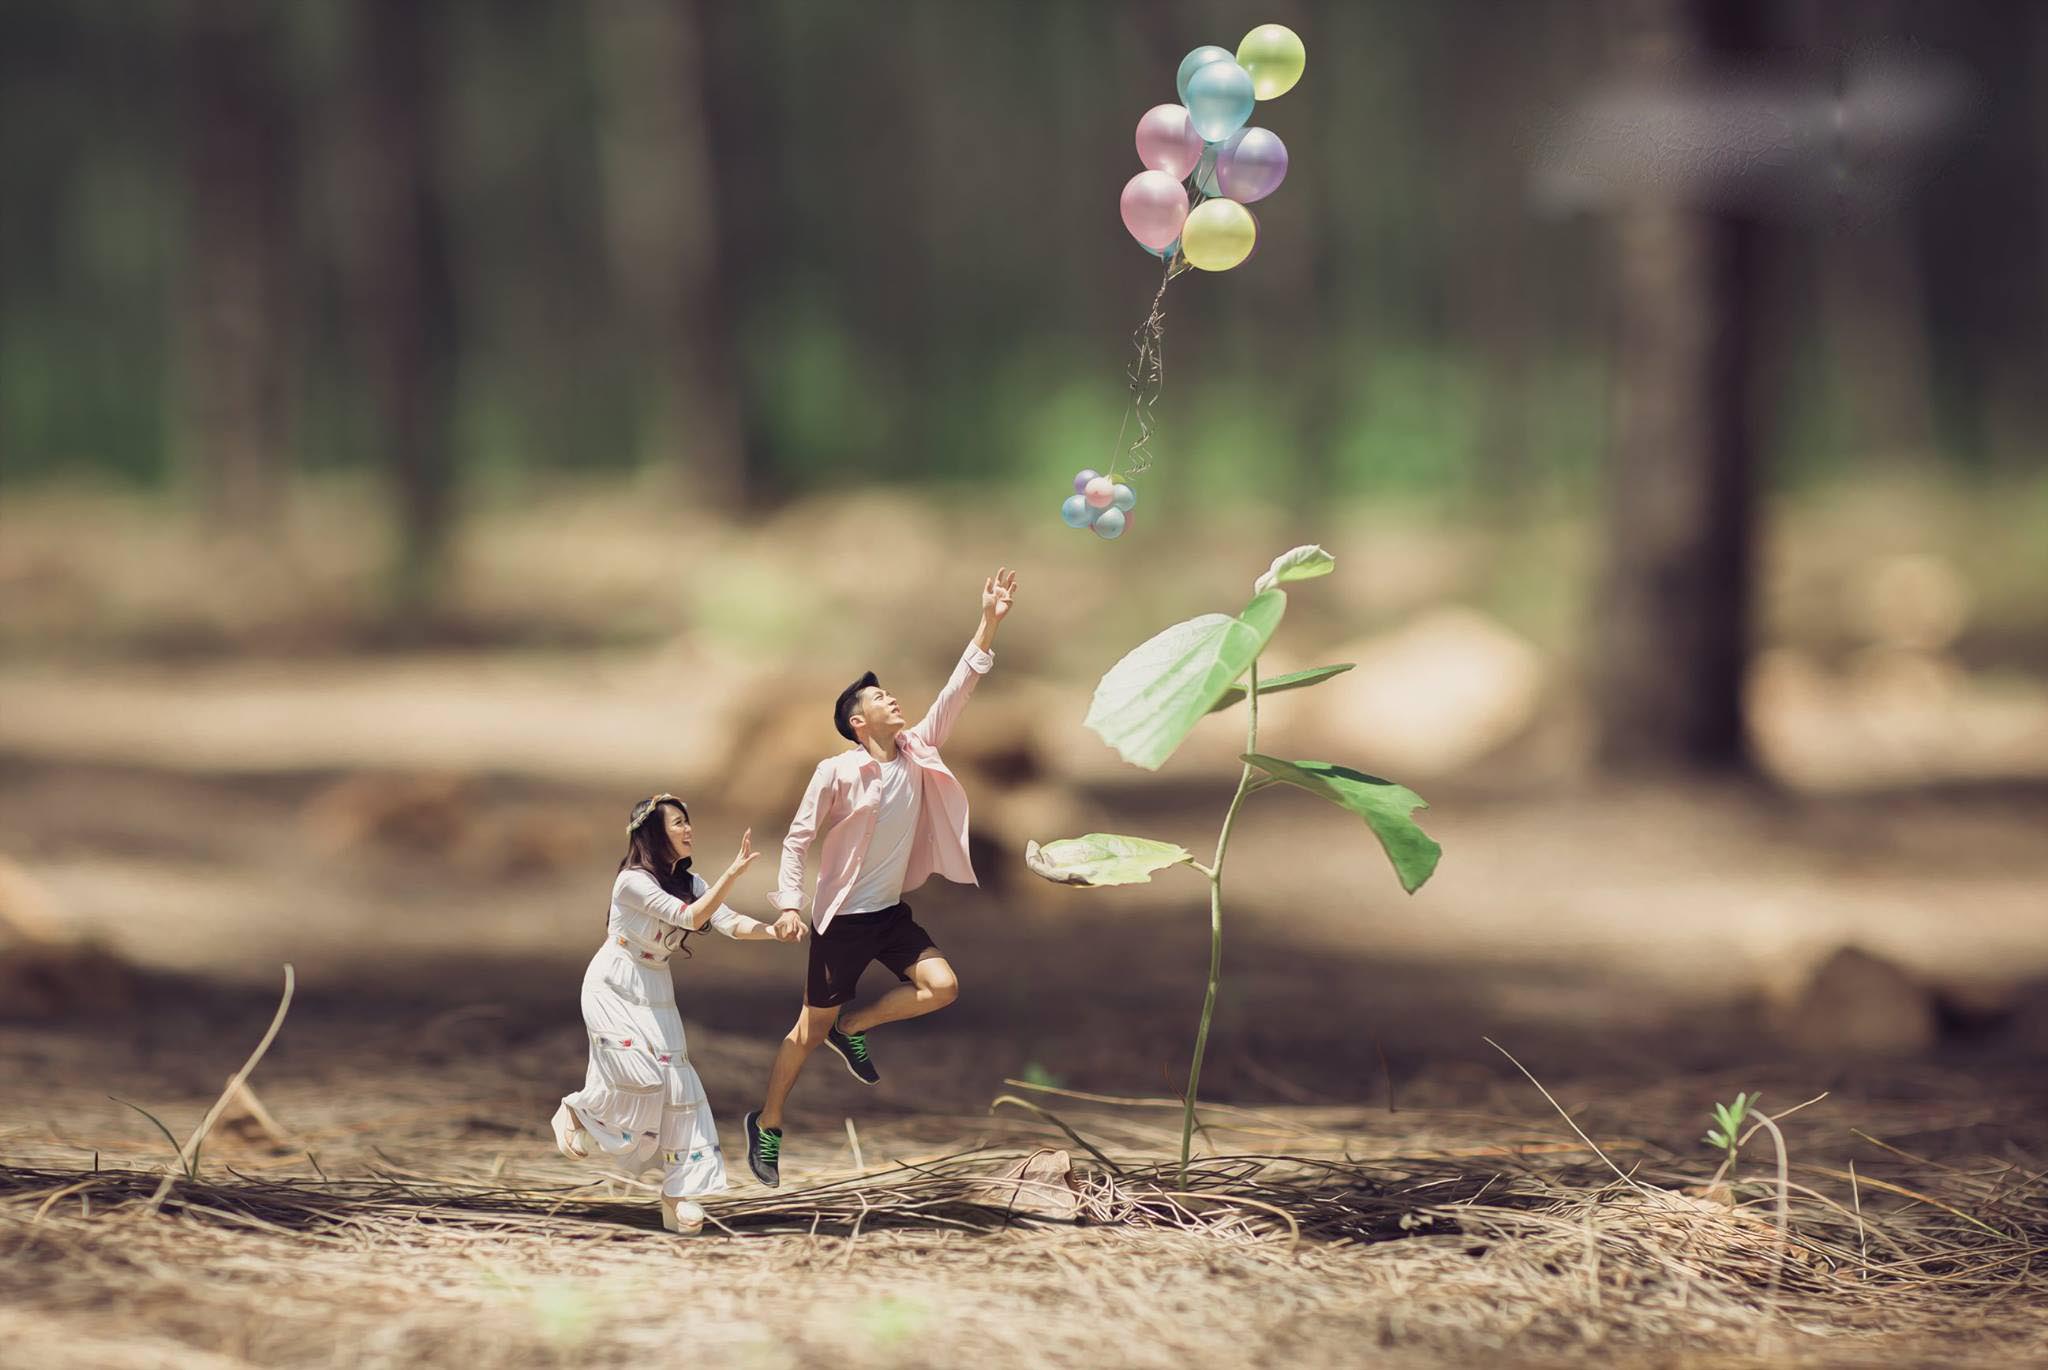 Miniature Wedding Photography is a Thing and People Are Going For It